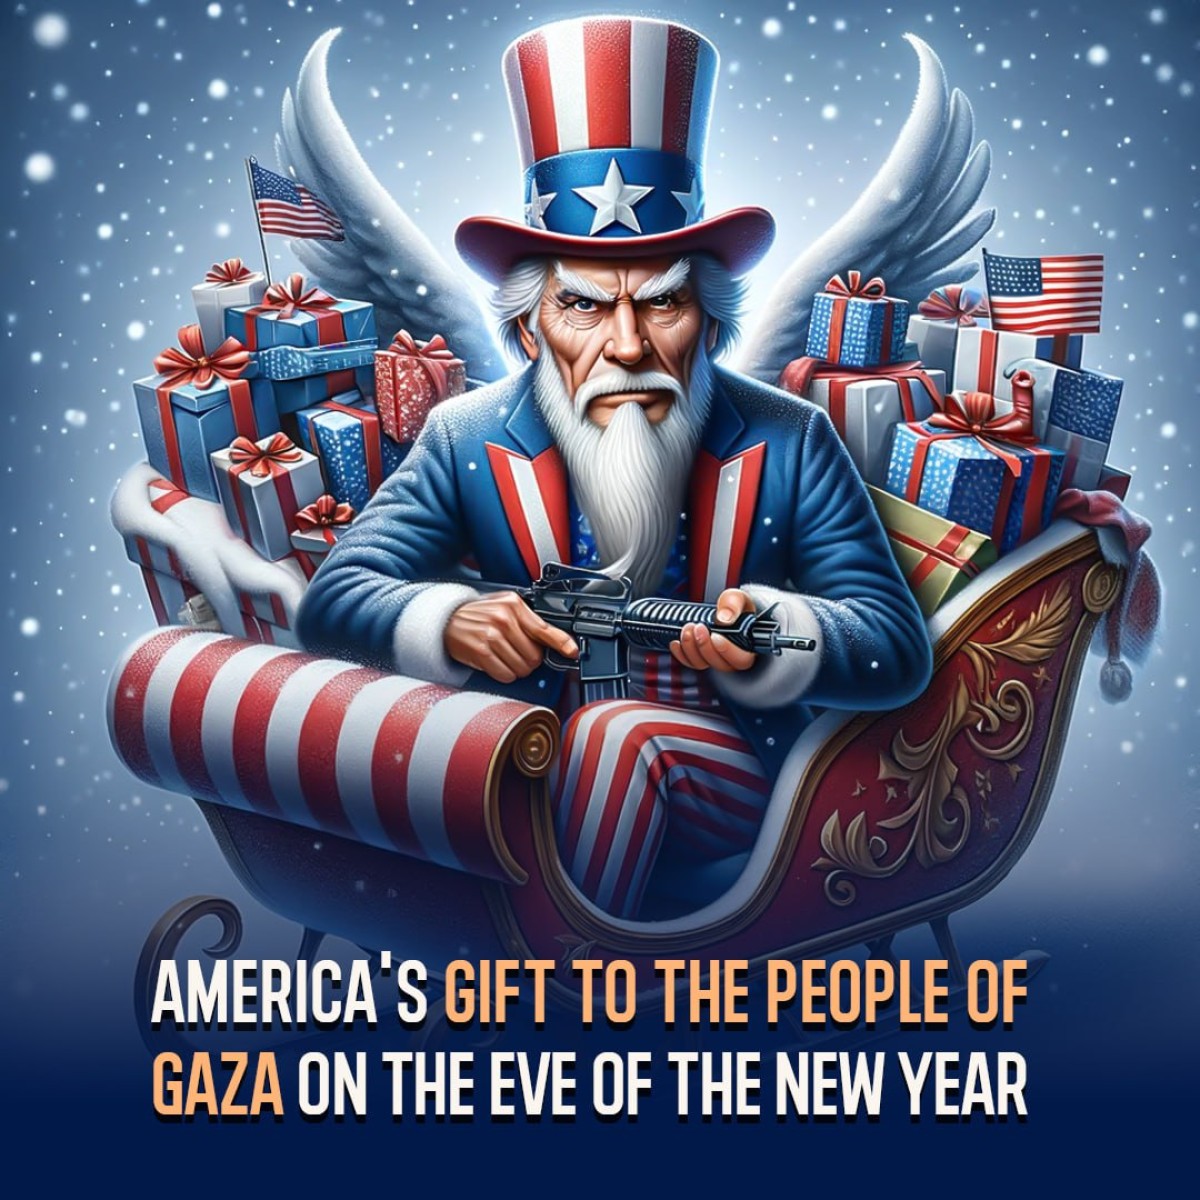 AMERICA'S GIFT TO THE PEOPLE OF GAZA ON THE EVE OF THE NEW YEAR